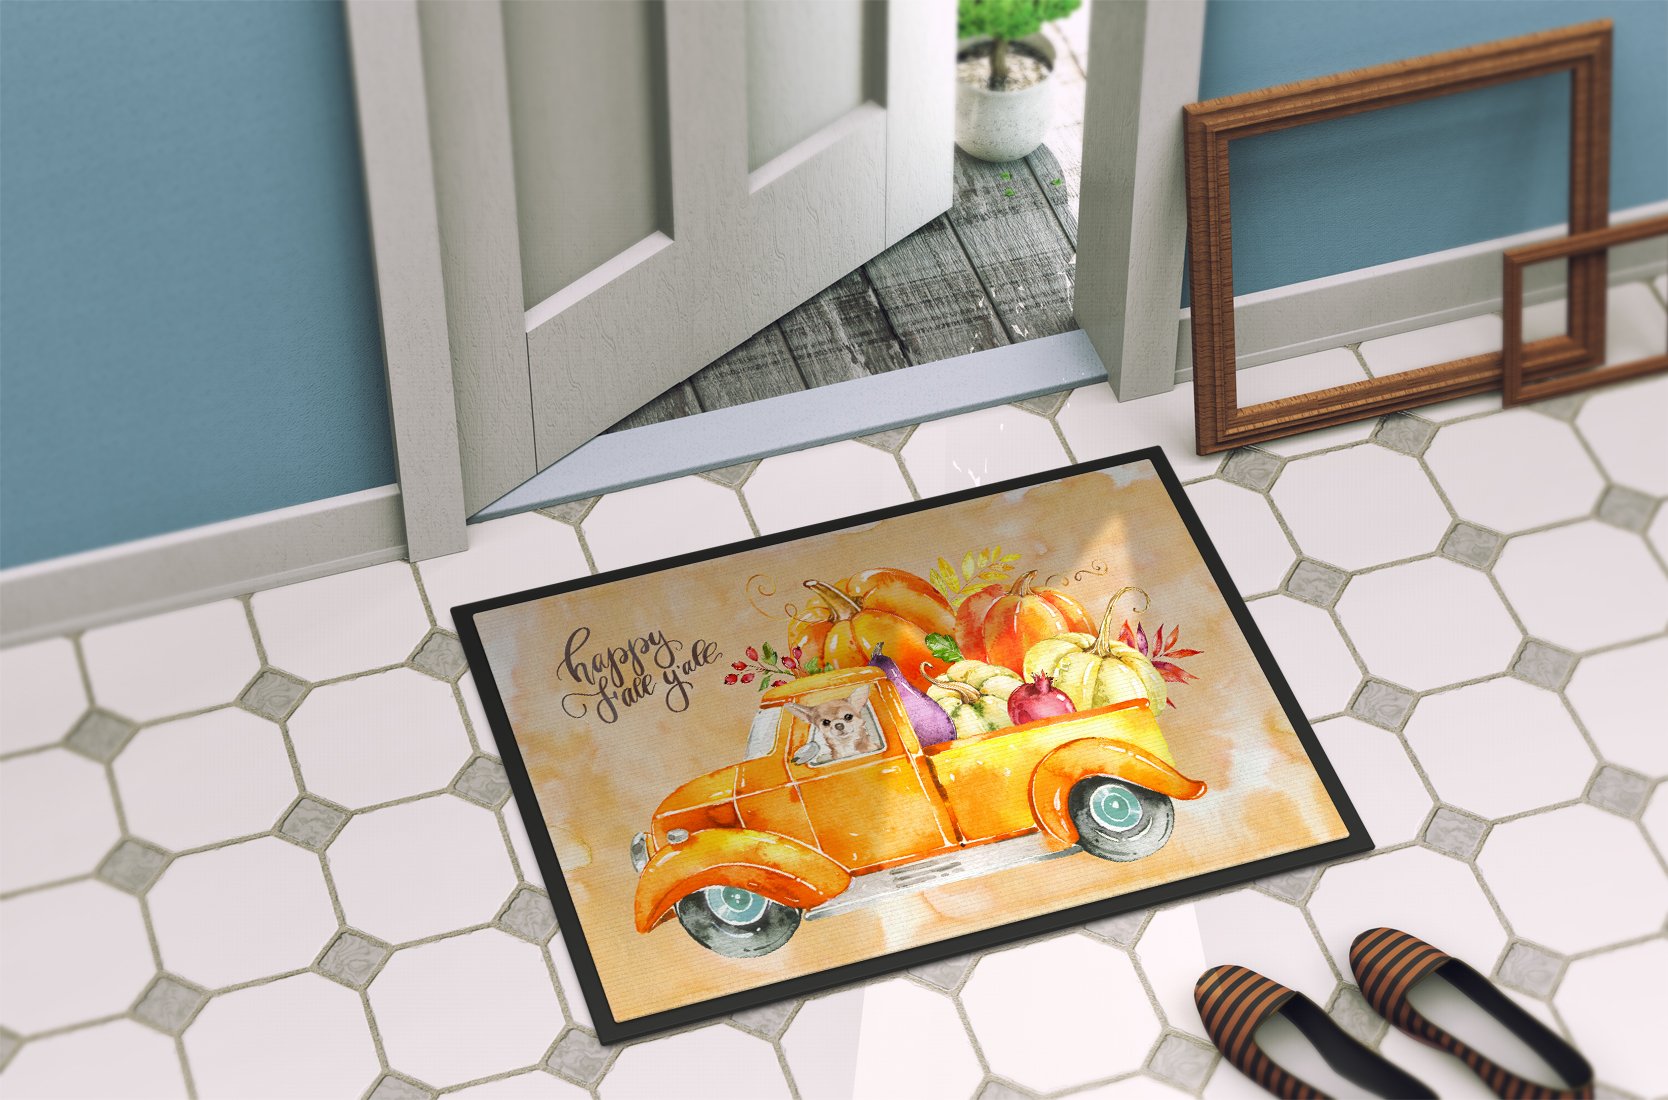 Fall Harvest Chihuahua Indoor or Outdoor Mat 24x36 CK2661JMAT by Caroline's Treasures